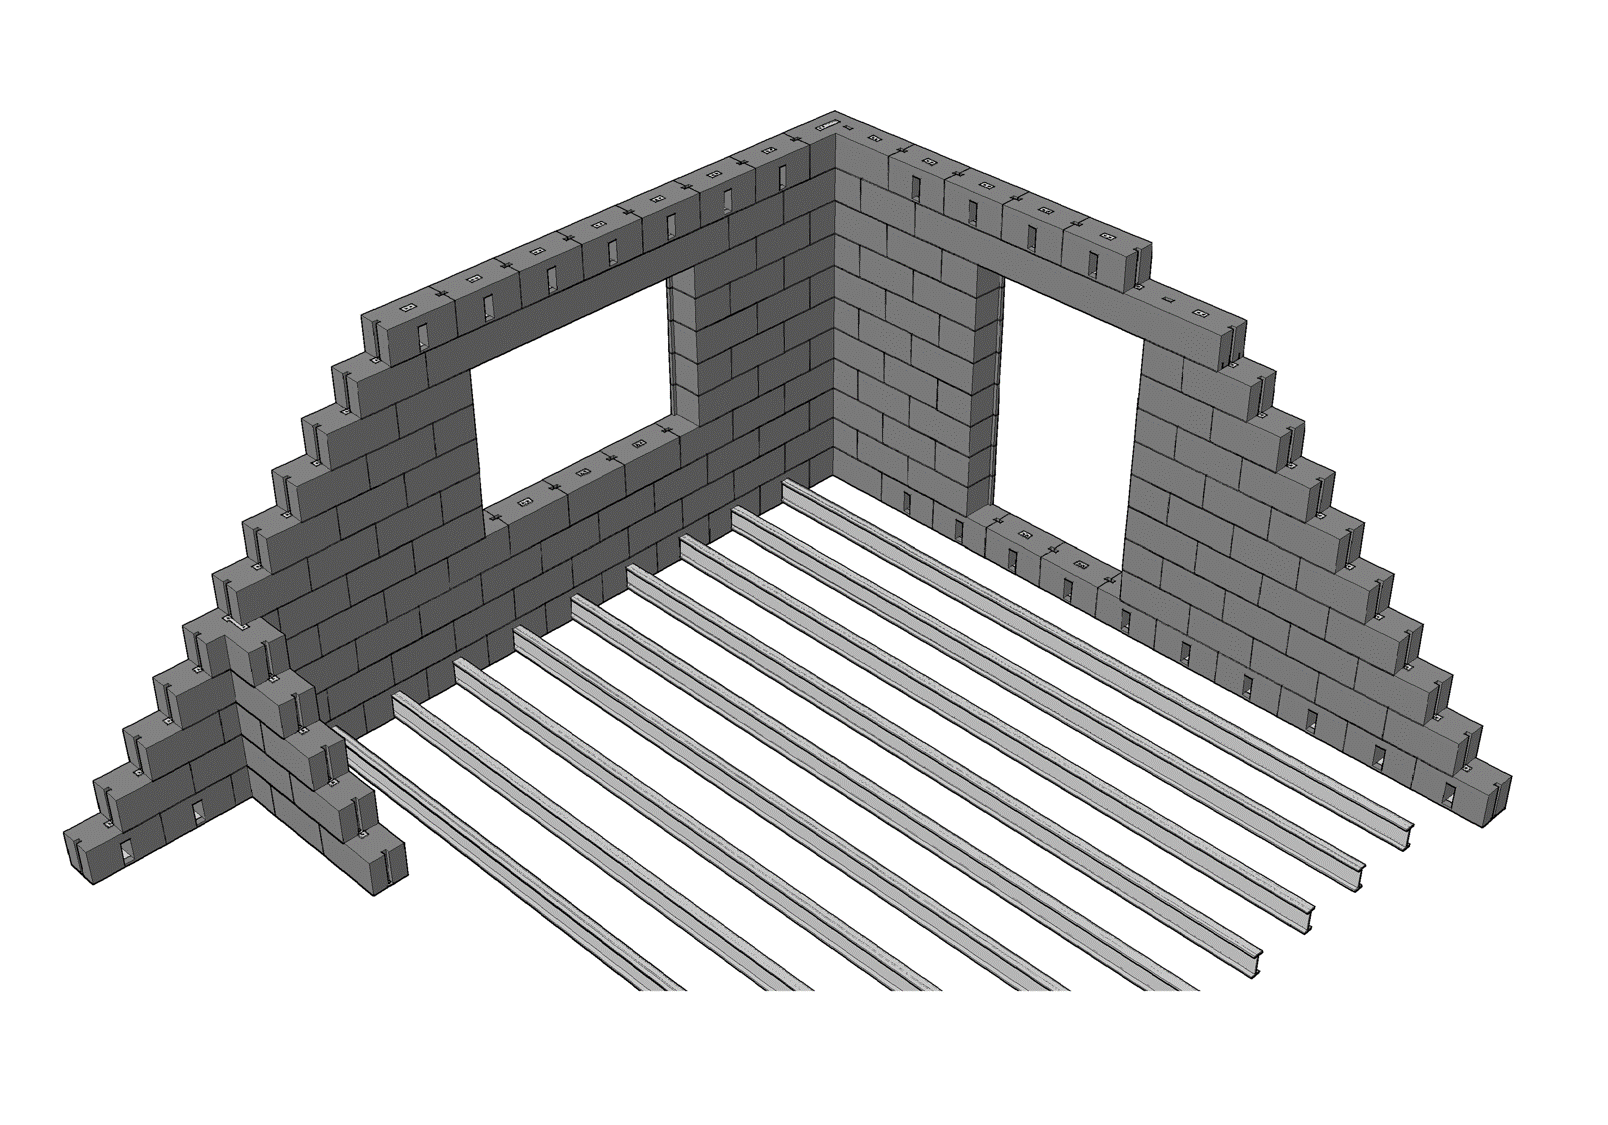 The block has modifications such as corner blocks, blocks for doors and windows, and others. Similar to the toy set Lego, only a small set of block forms is needed to erect complex buildings.